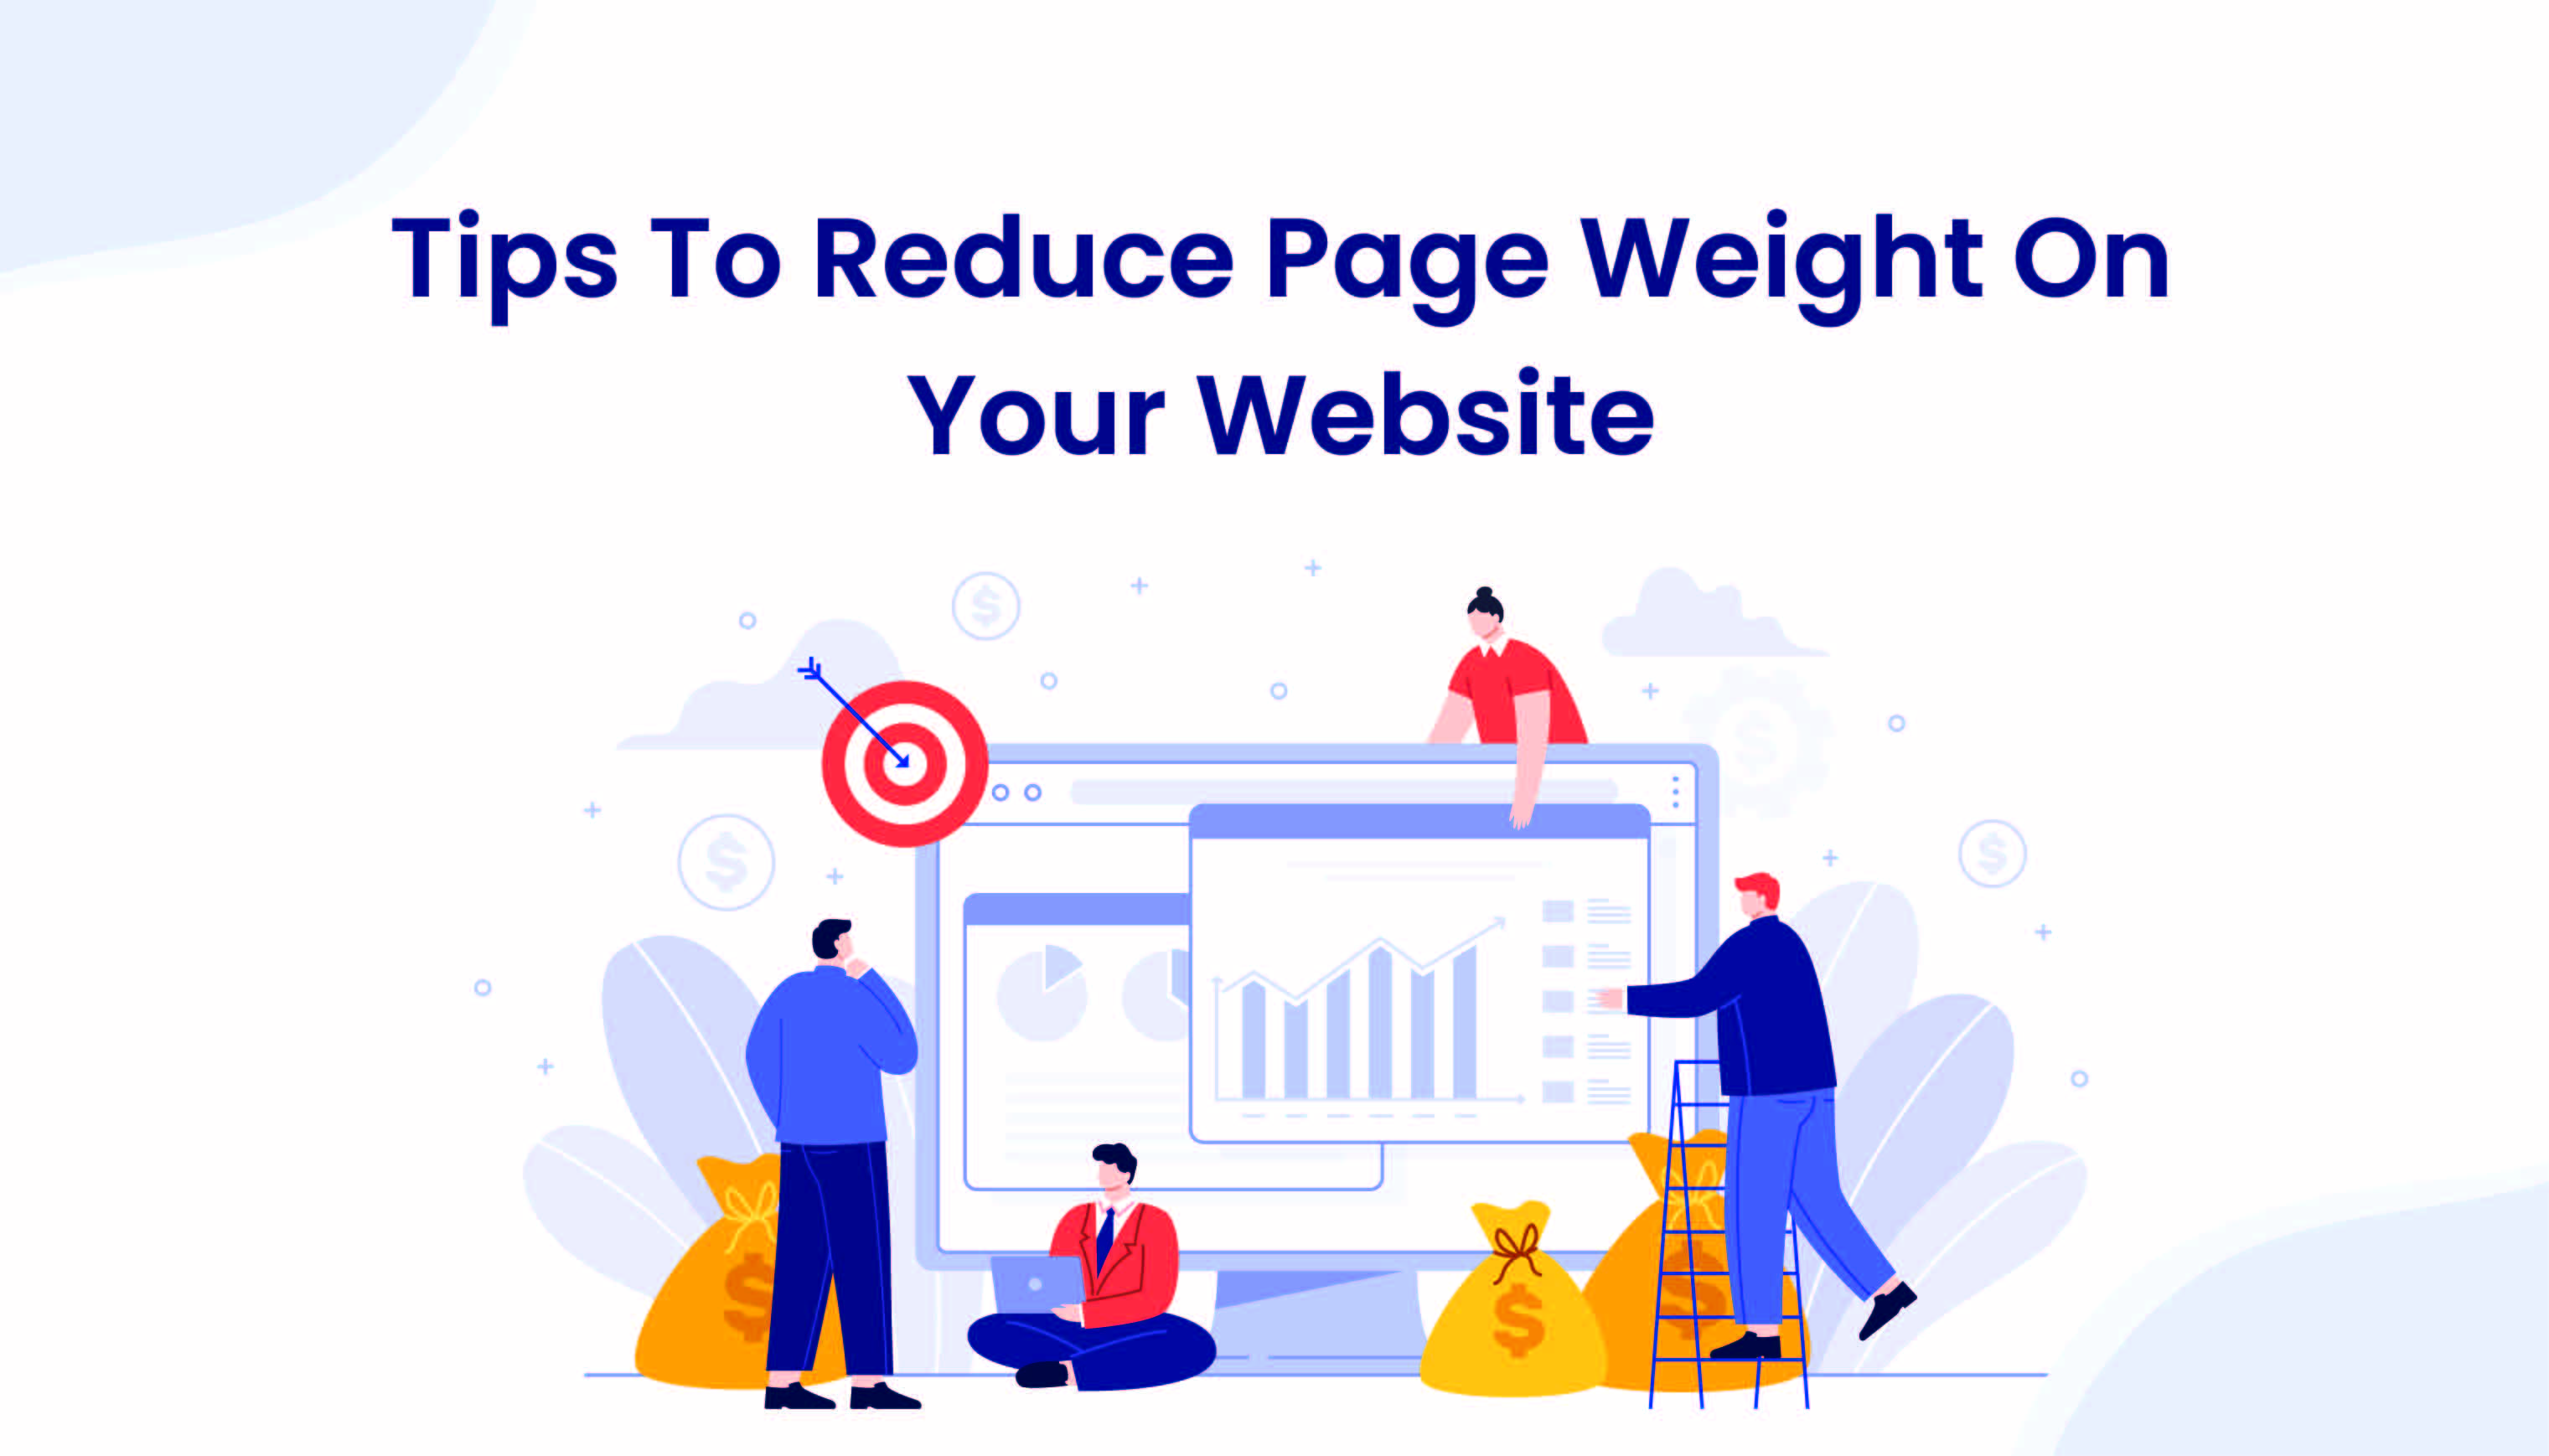 How To Reduce Page Weight On Your Website